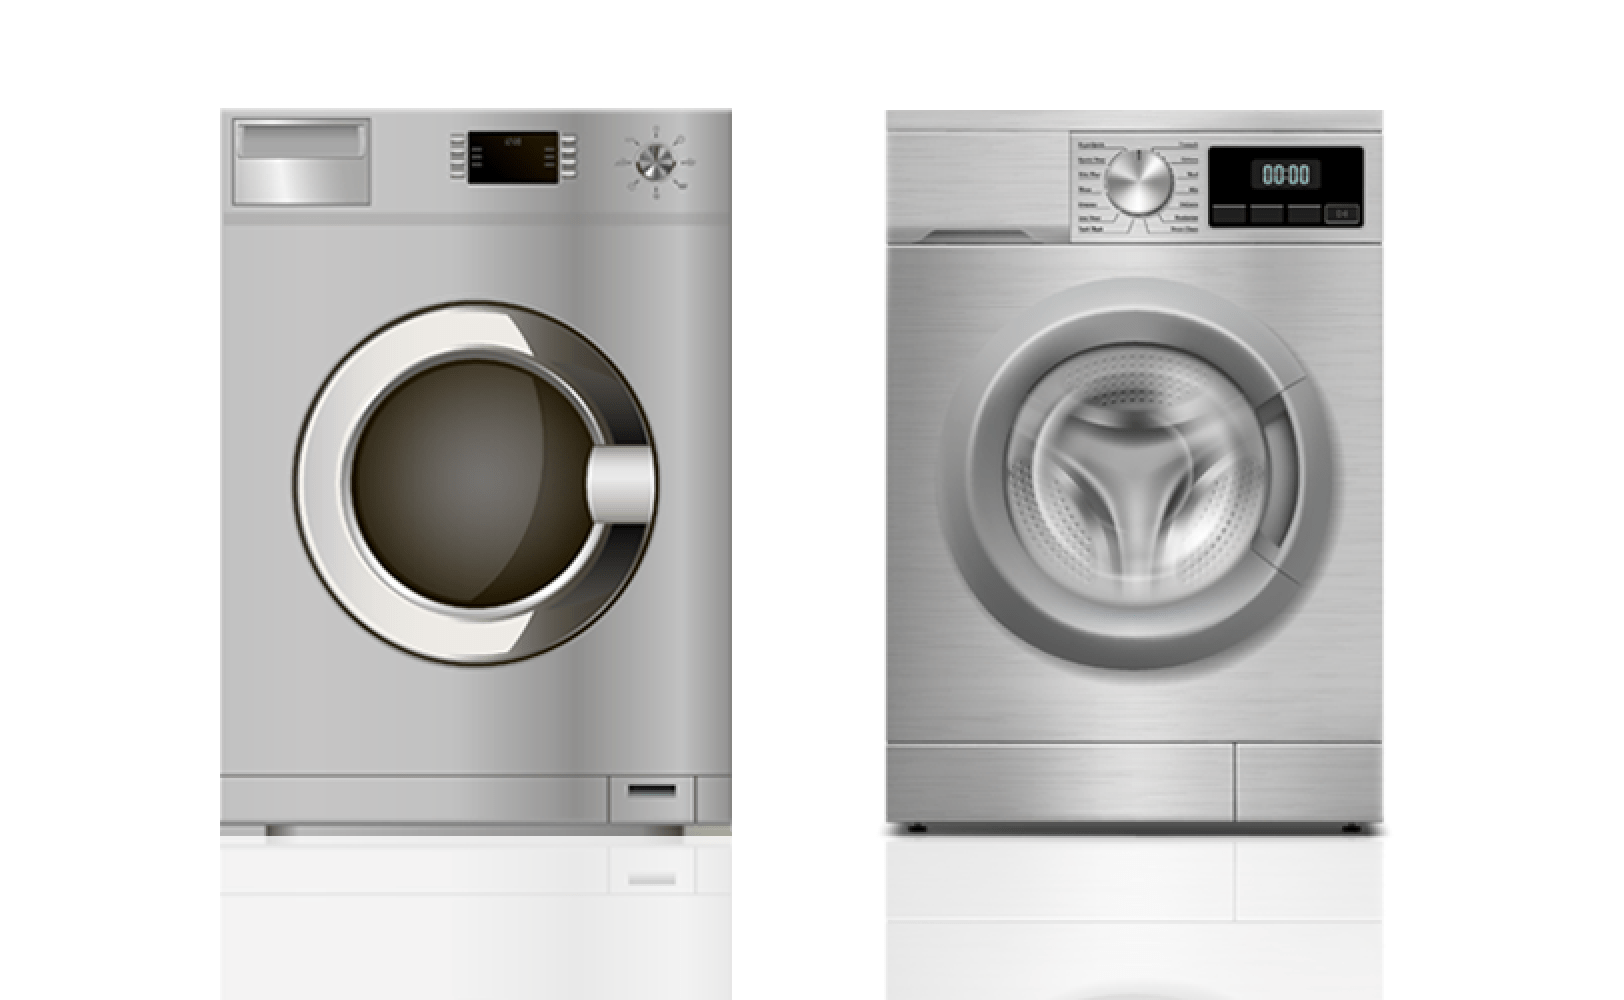 Washer Repair Service in Franklin